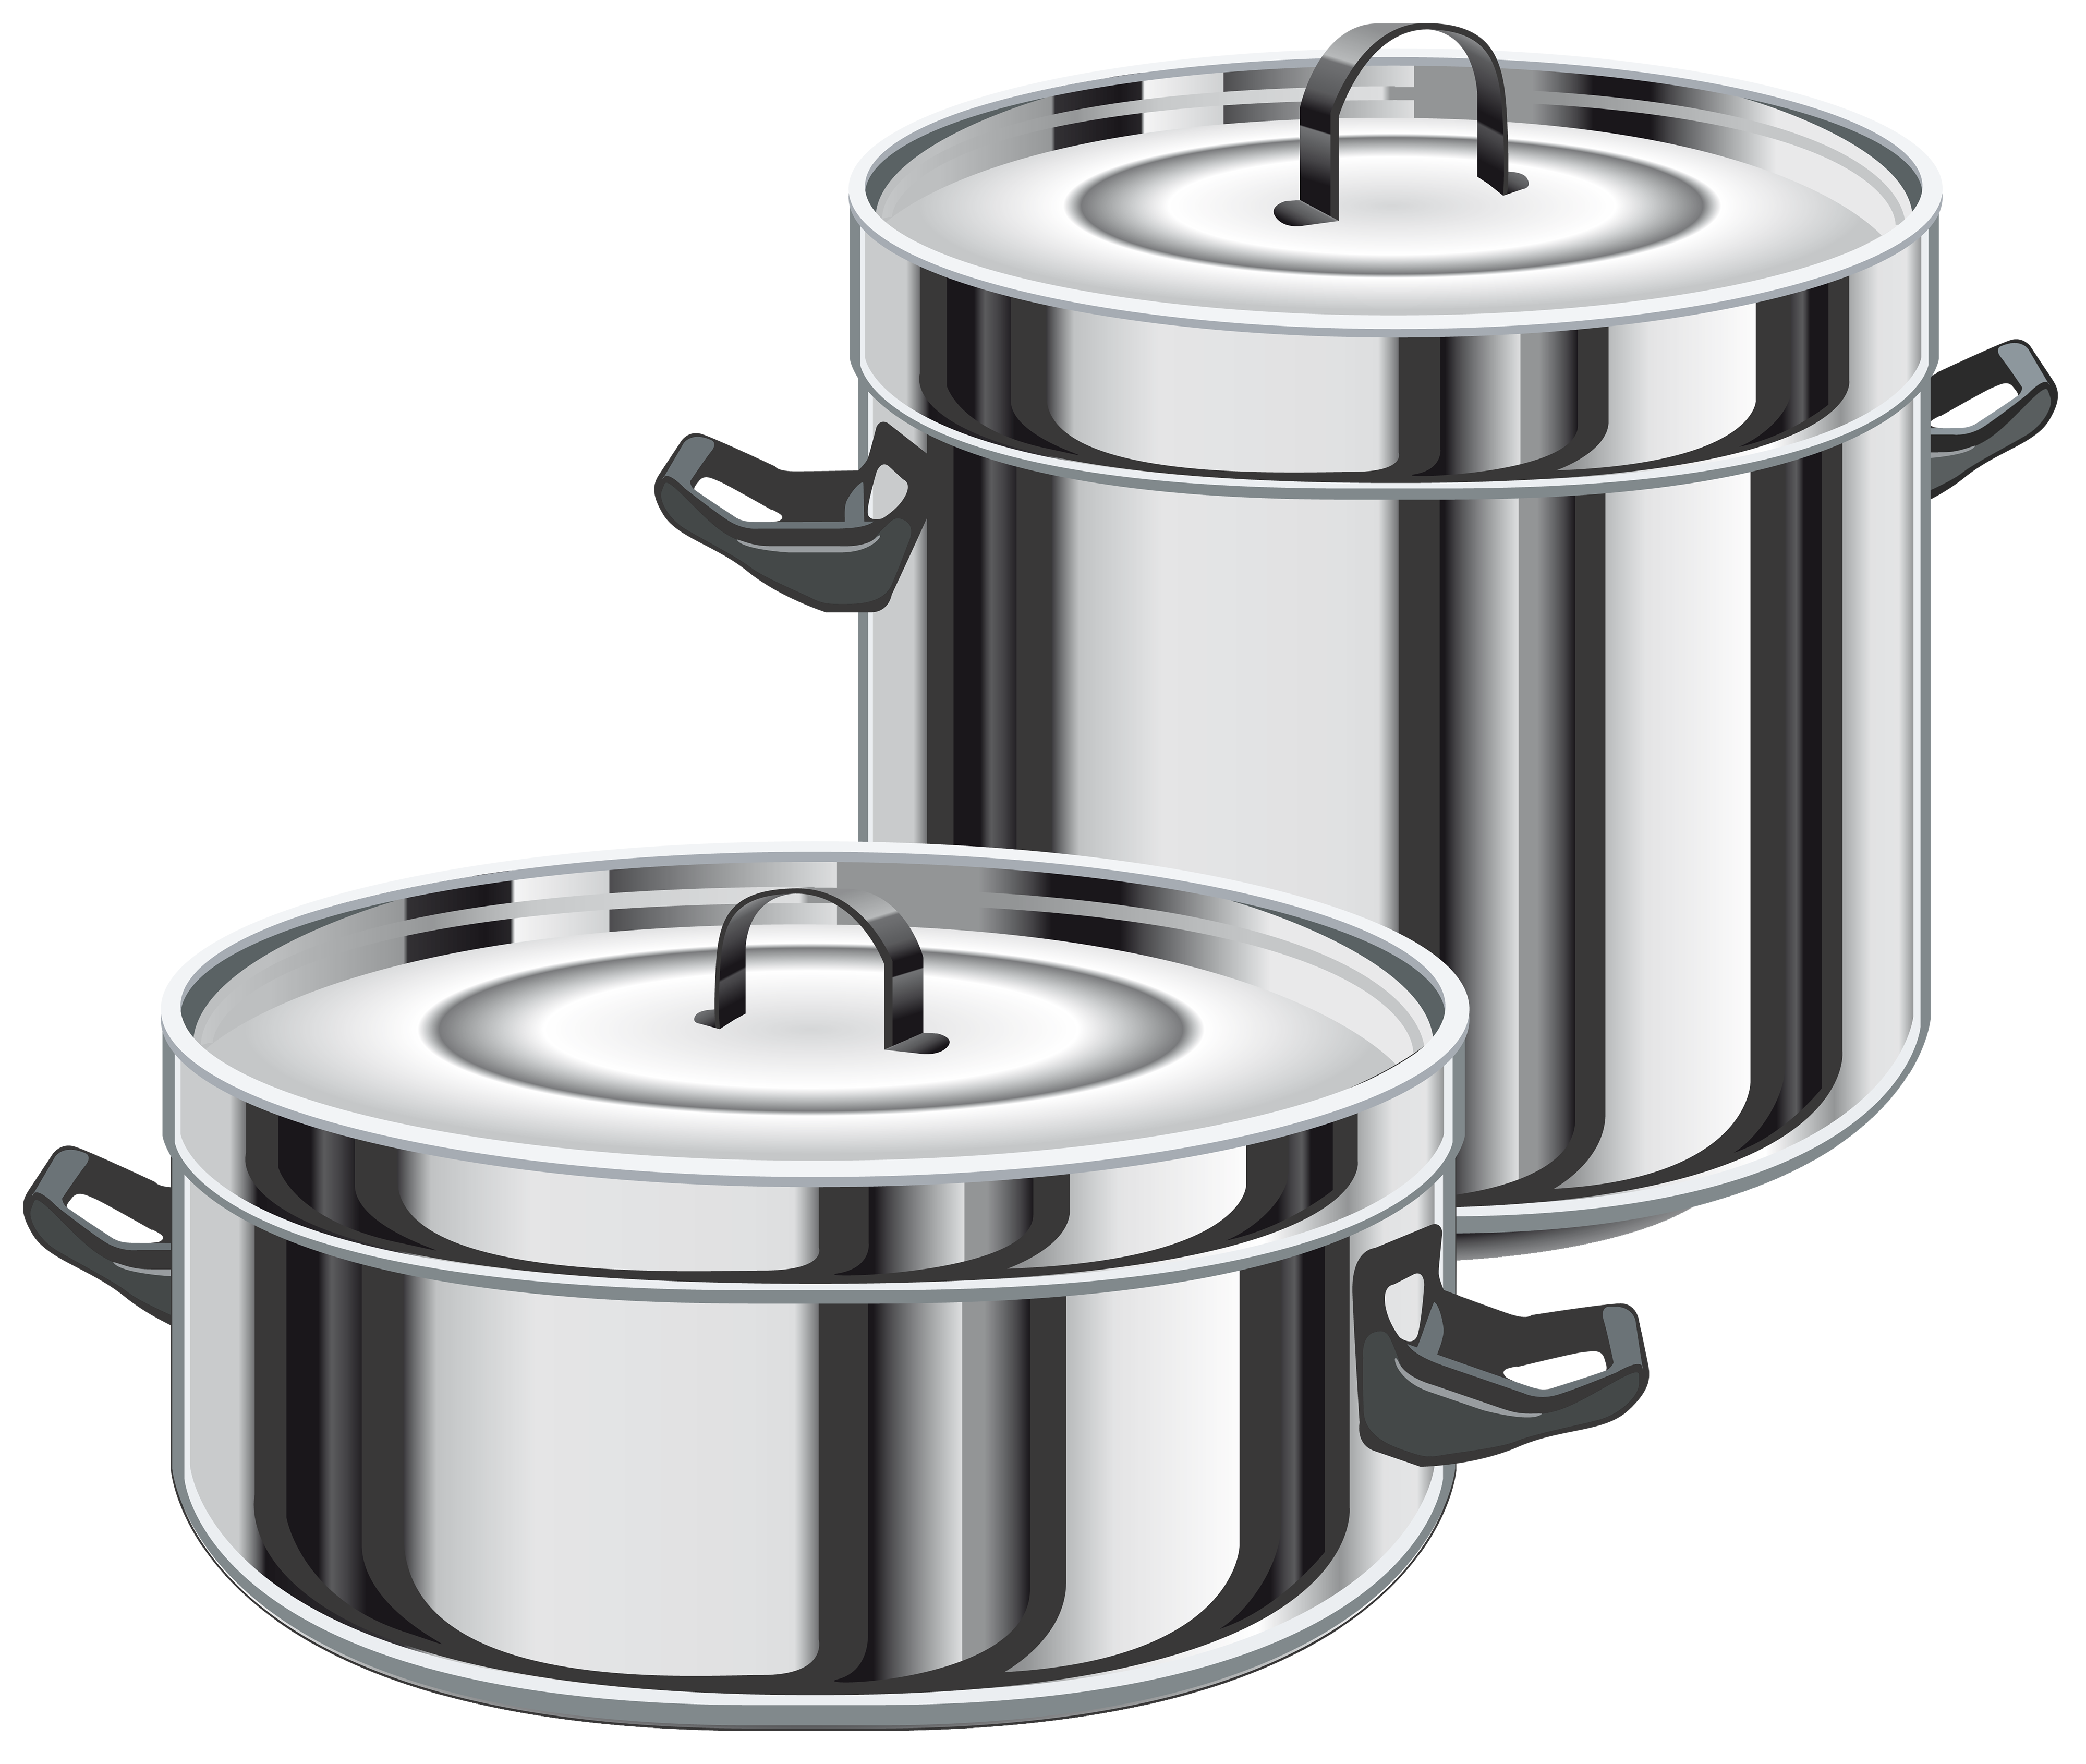 Dirty Pots And Pans PNG - 166575